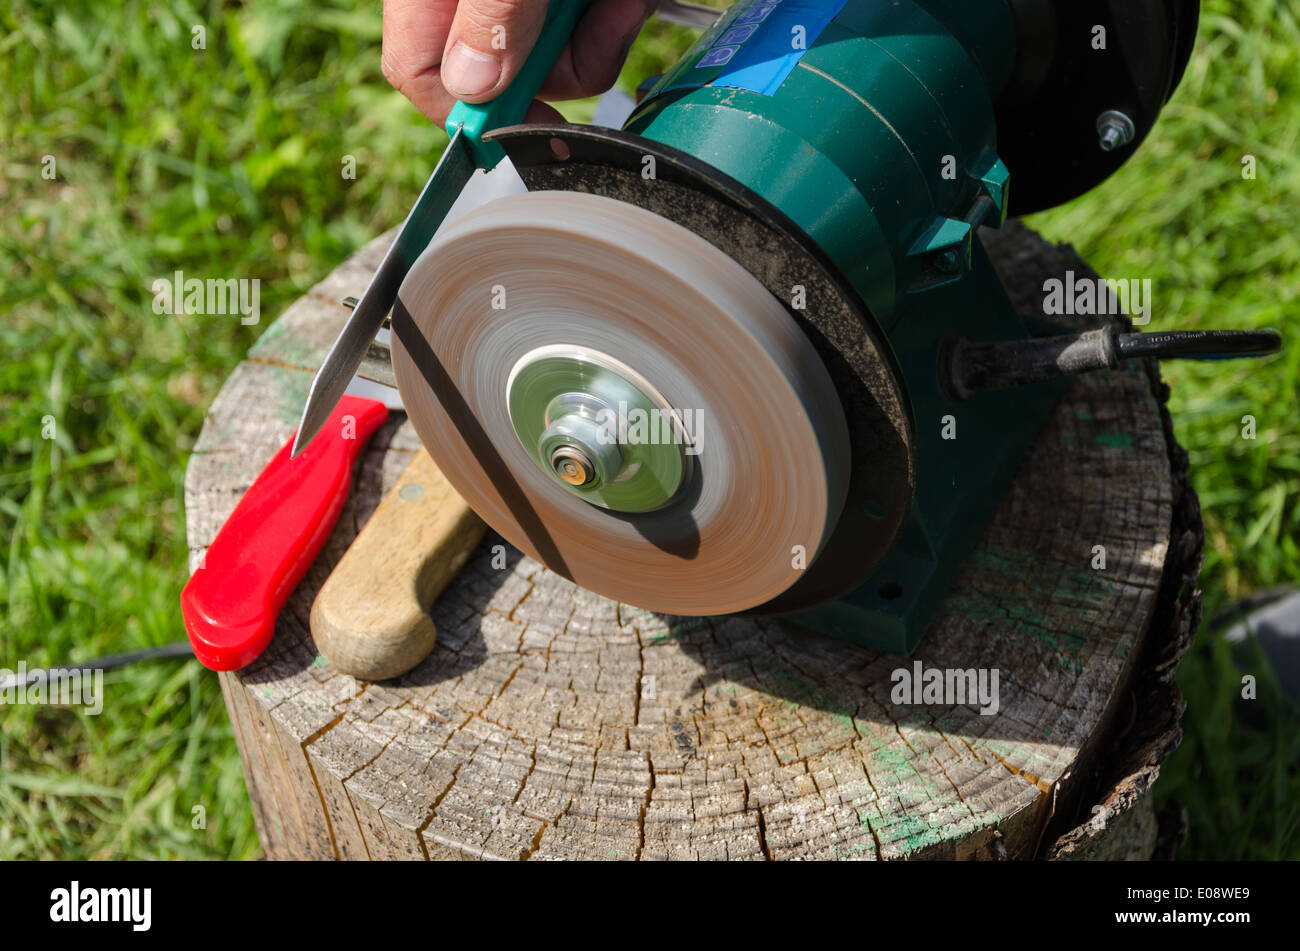 Hand sharpening knives with electric grinder tool on outdoor wood log. Stock Photo